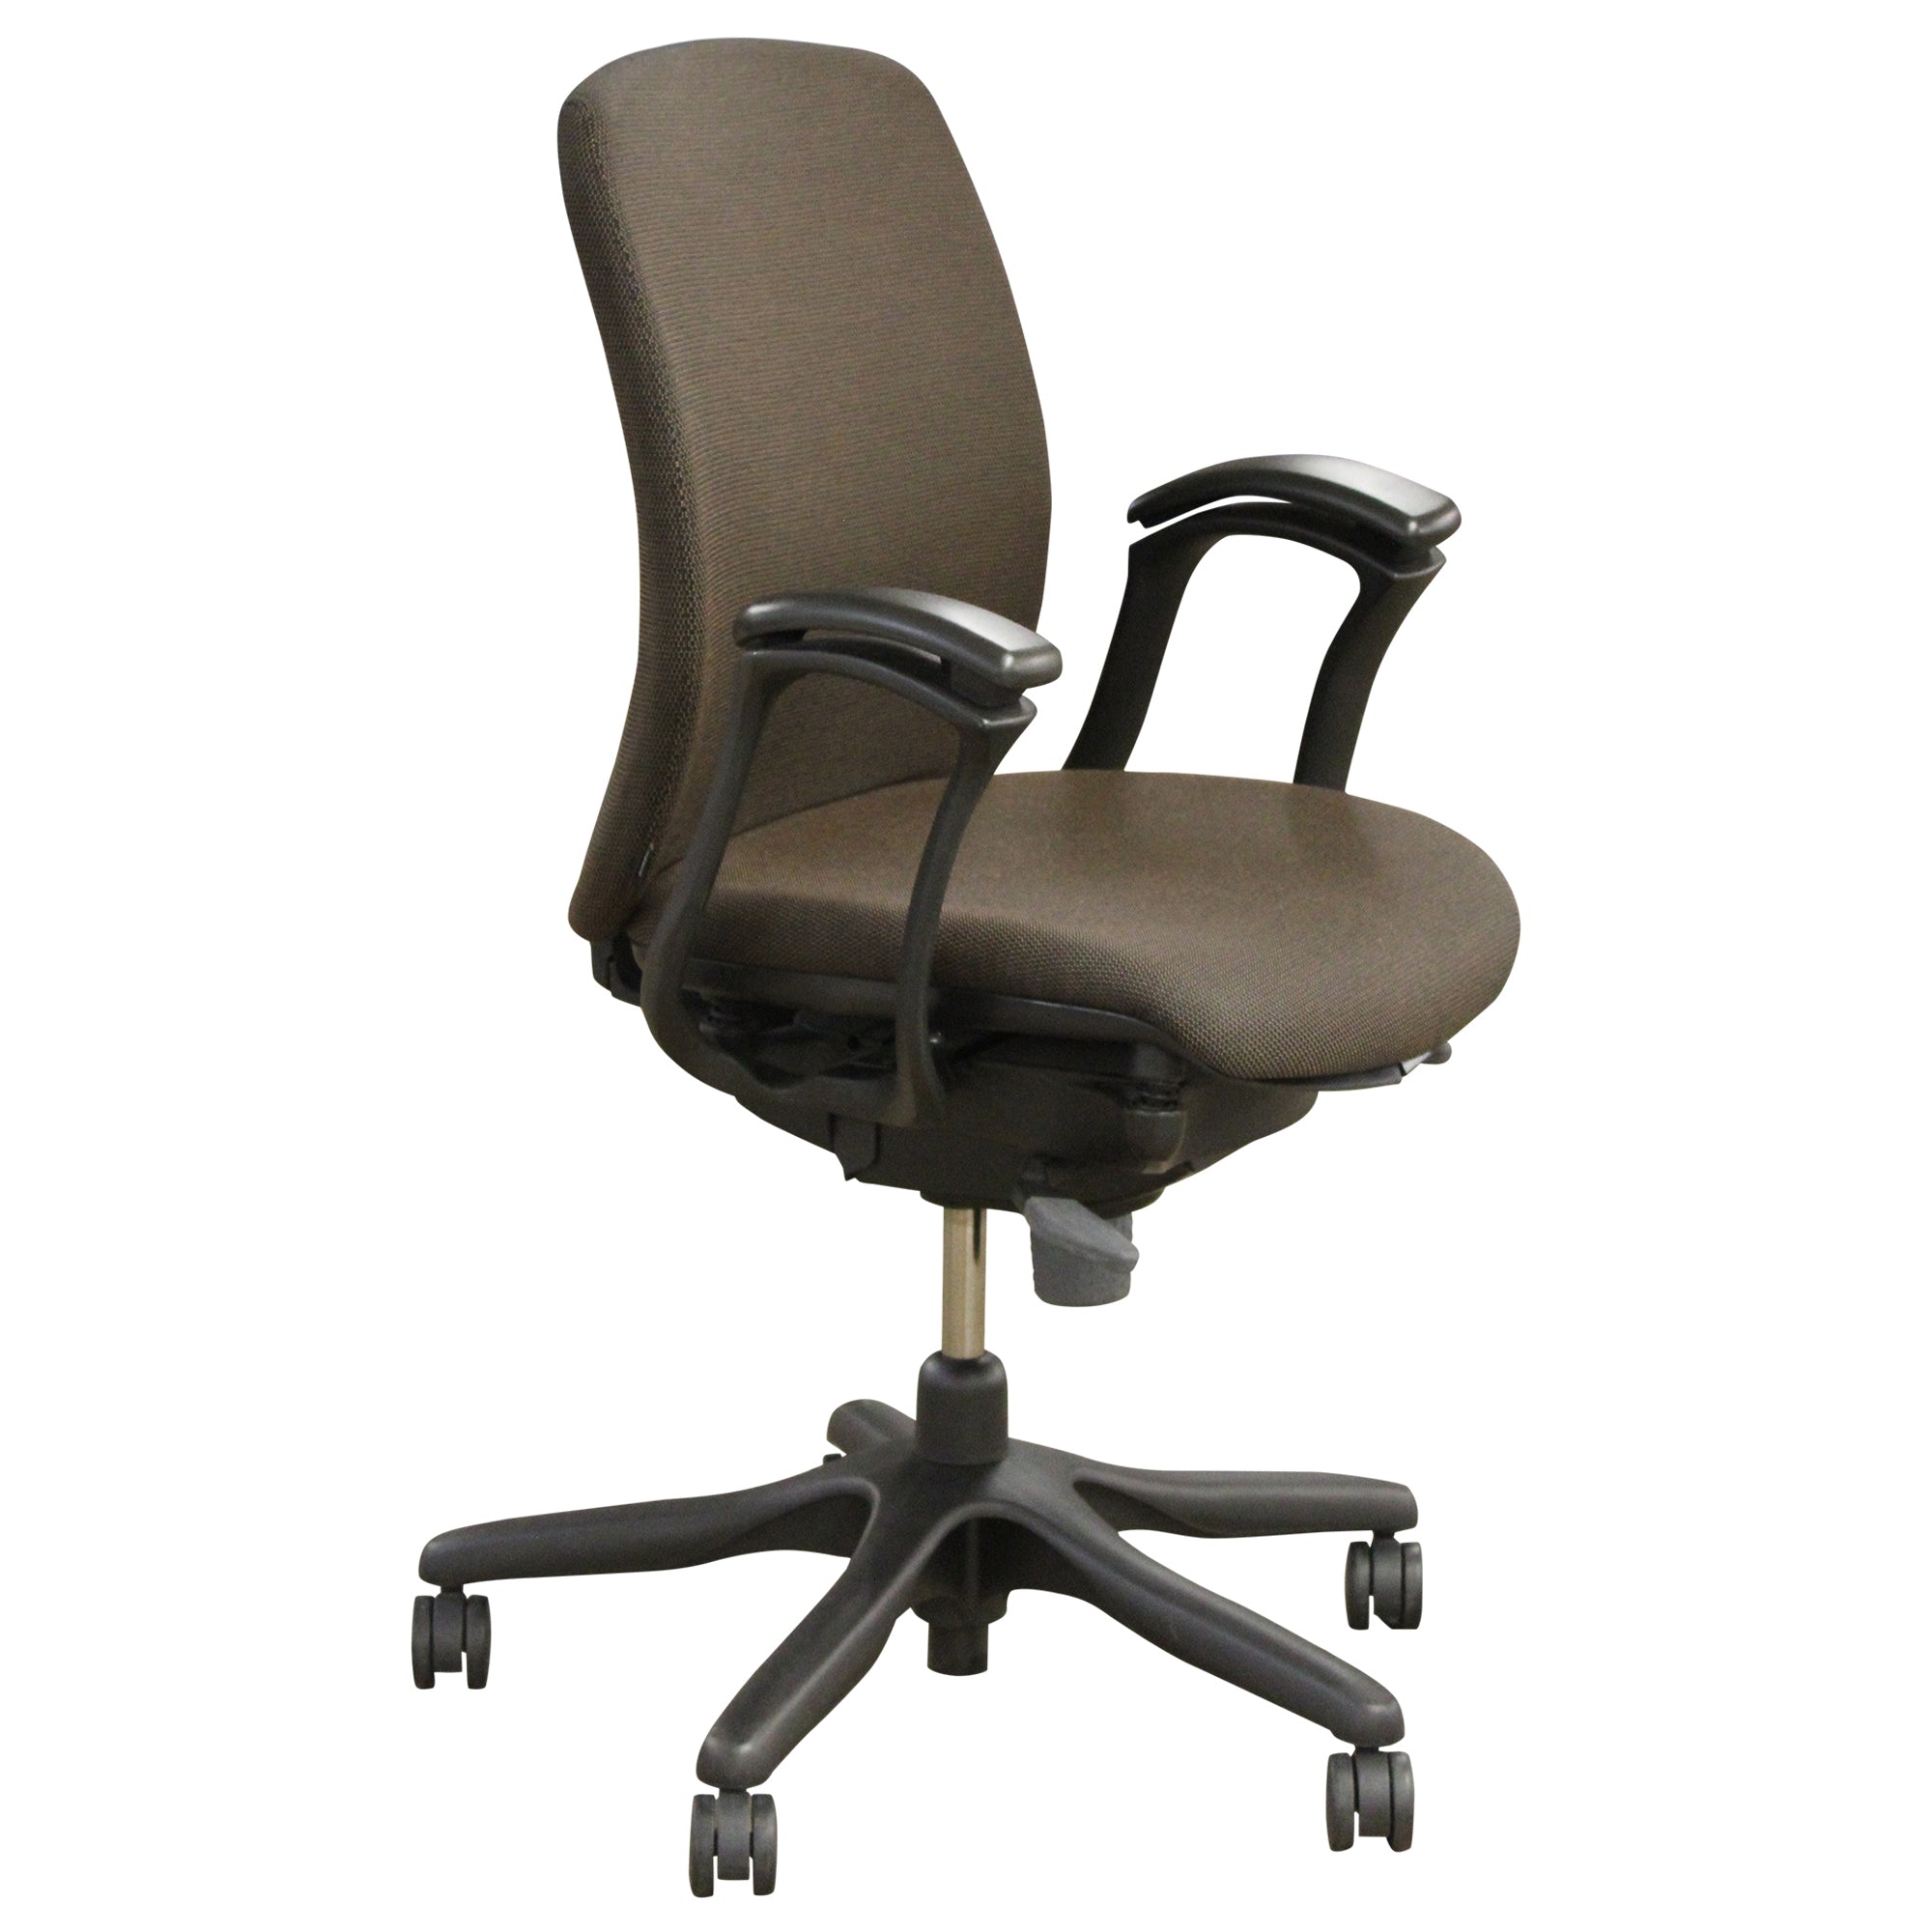 Teknion Amicus Task Chair - Brown -  Preowned